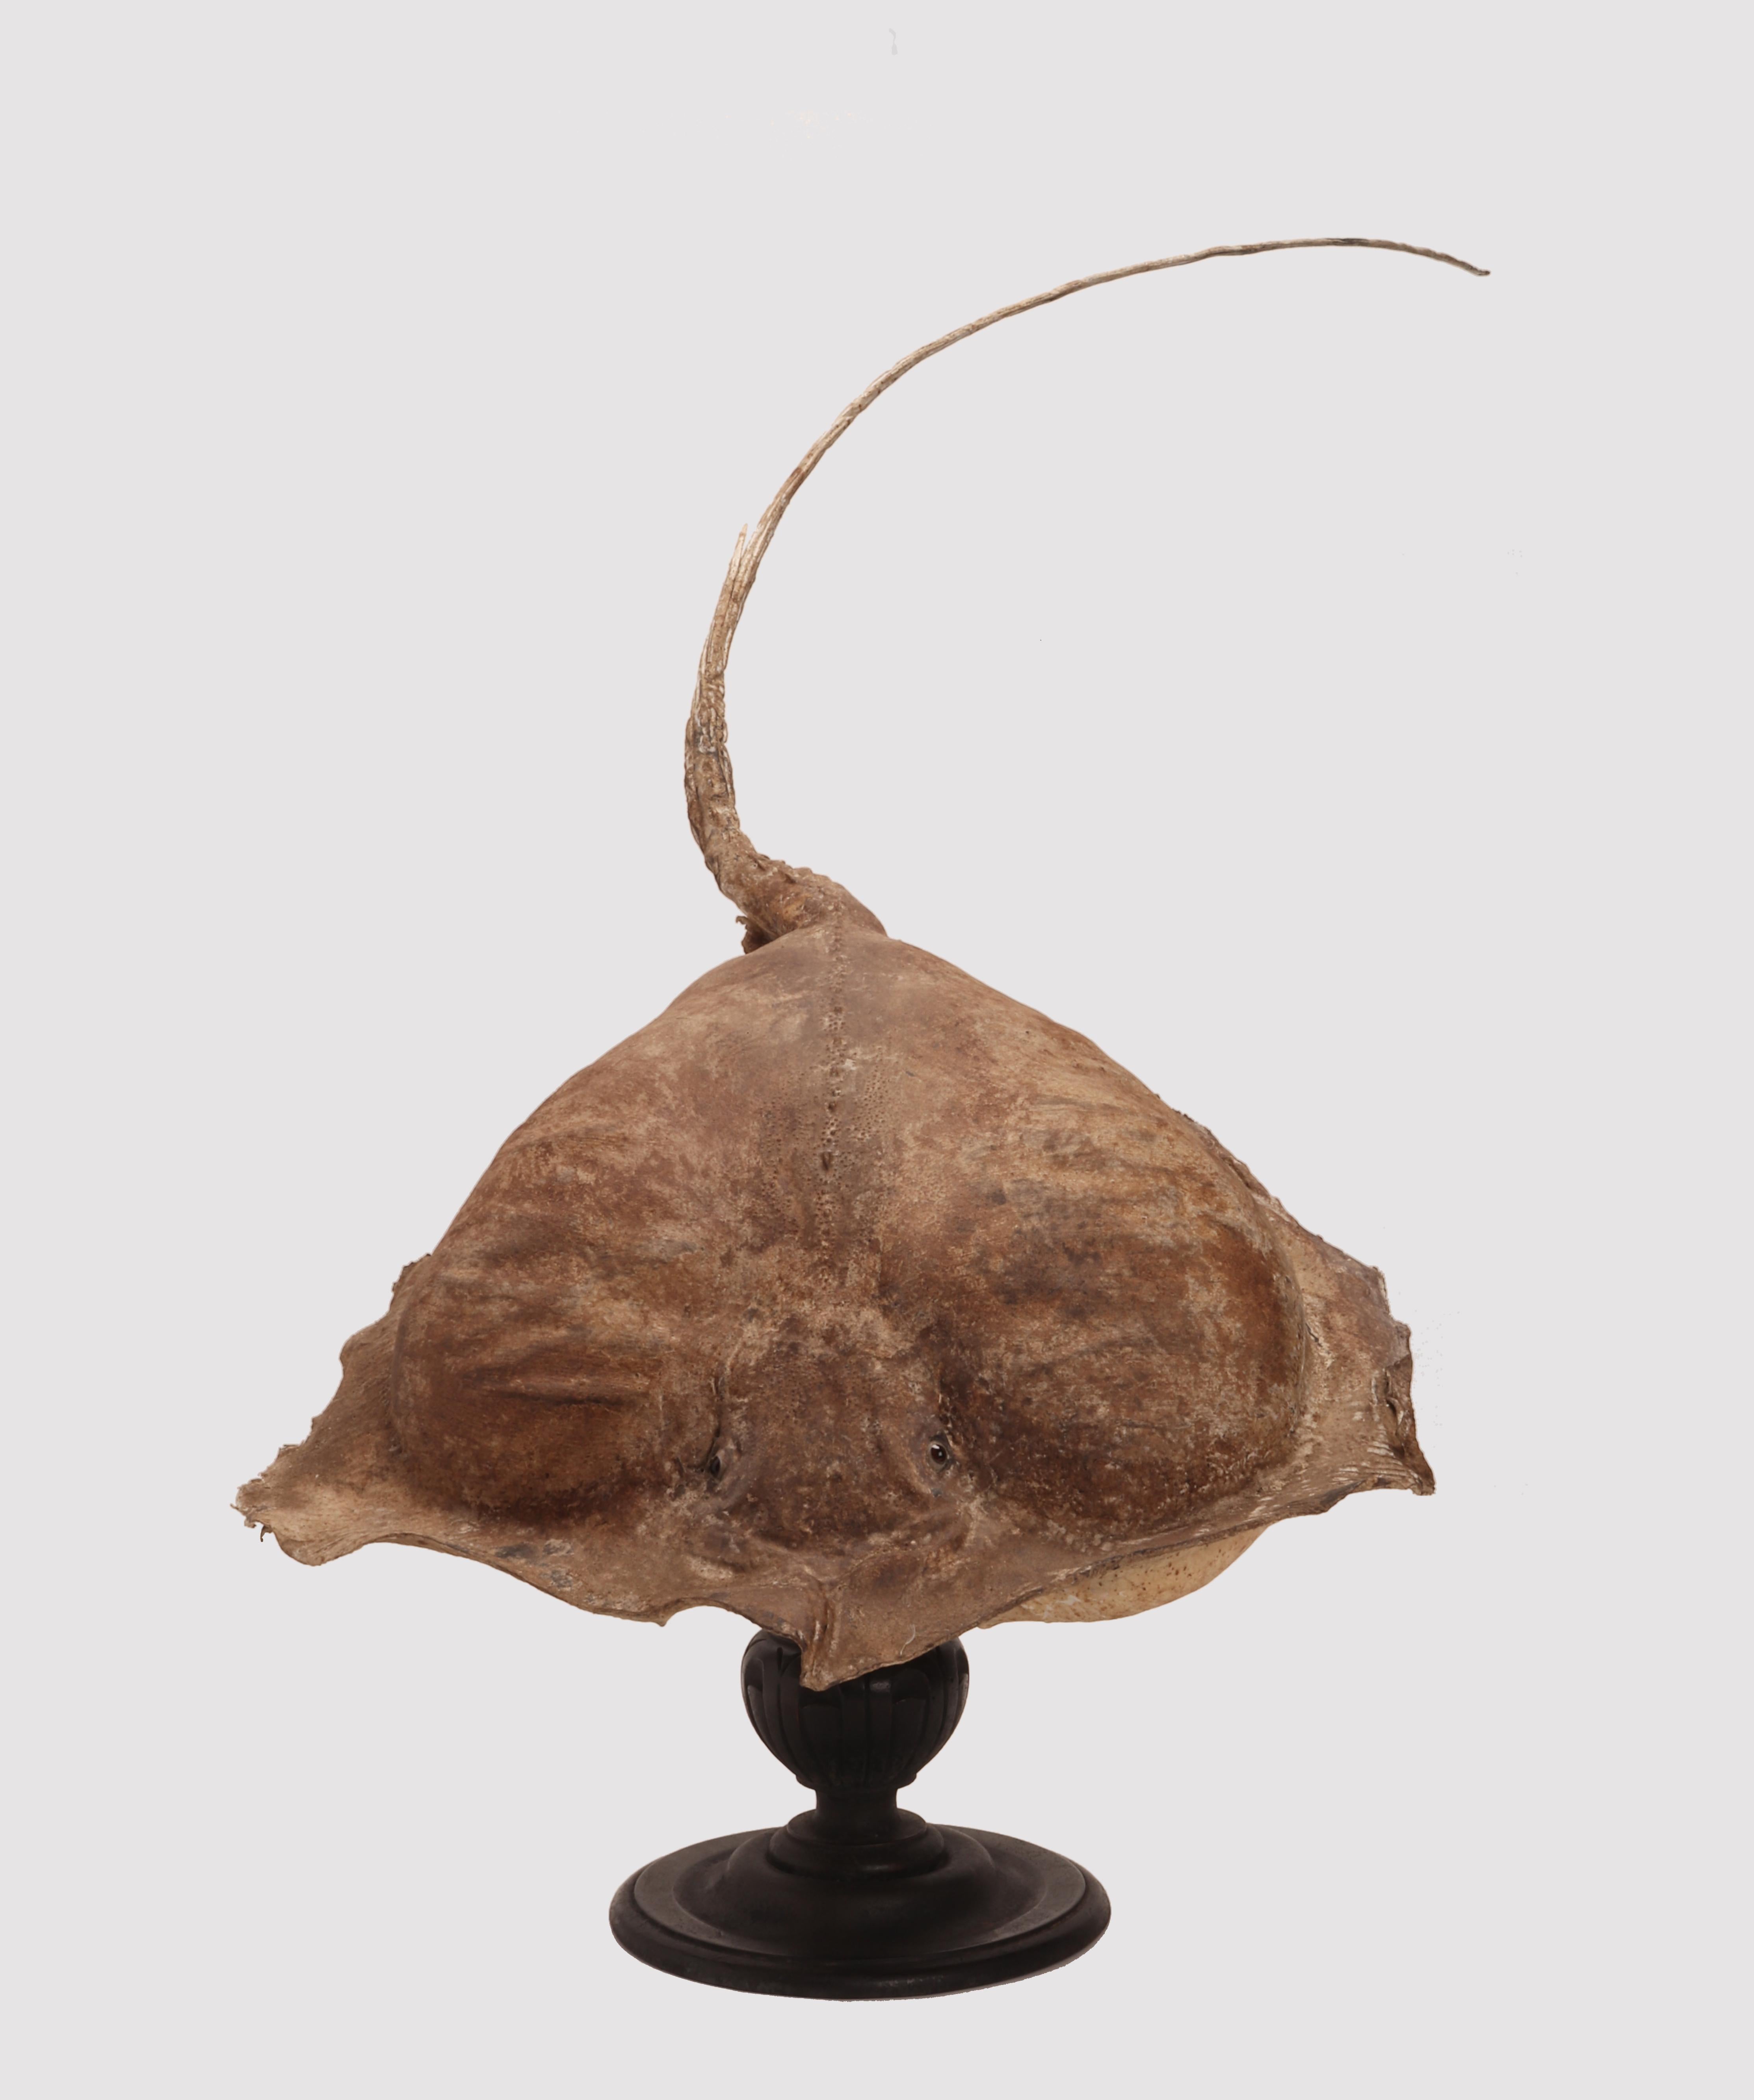 Taxidermy marine natural Wunderkammer specimen, embalmed Stingray (Raja Clavata). The Specimen is stuffed and mounted over a base that rotates 360 degrees on its own axis and tilts and locked with a double-wing brass hinge. The rotating base is in